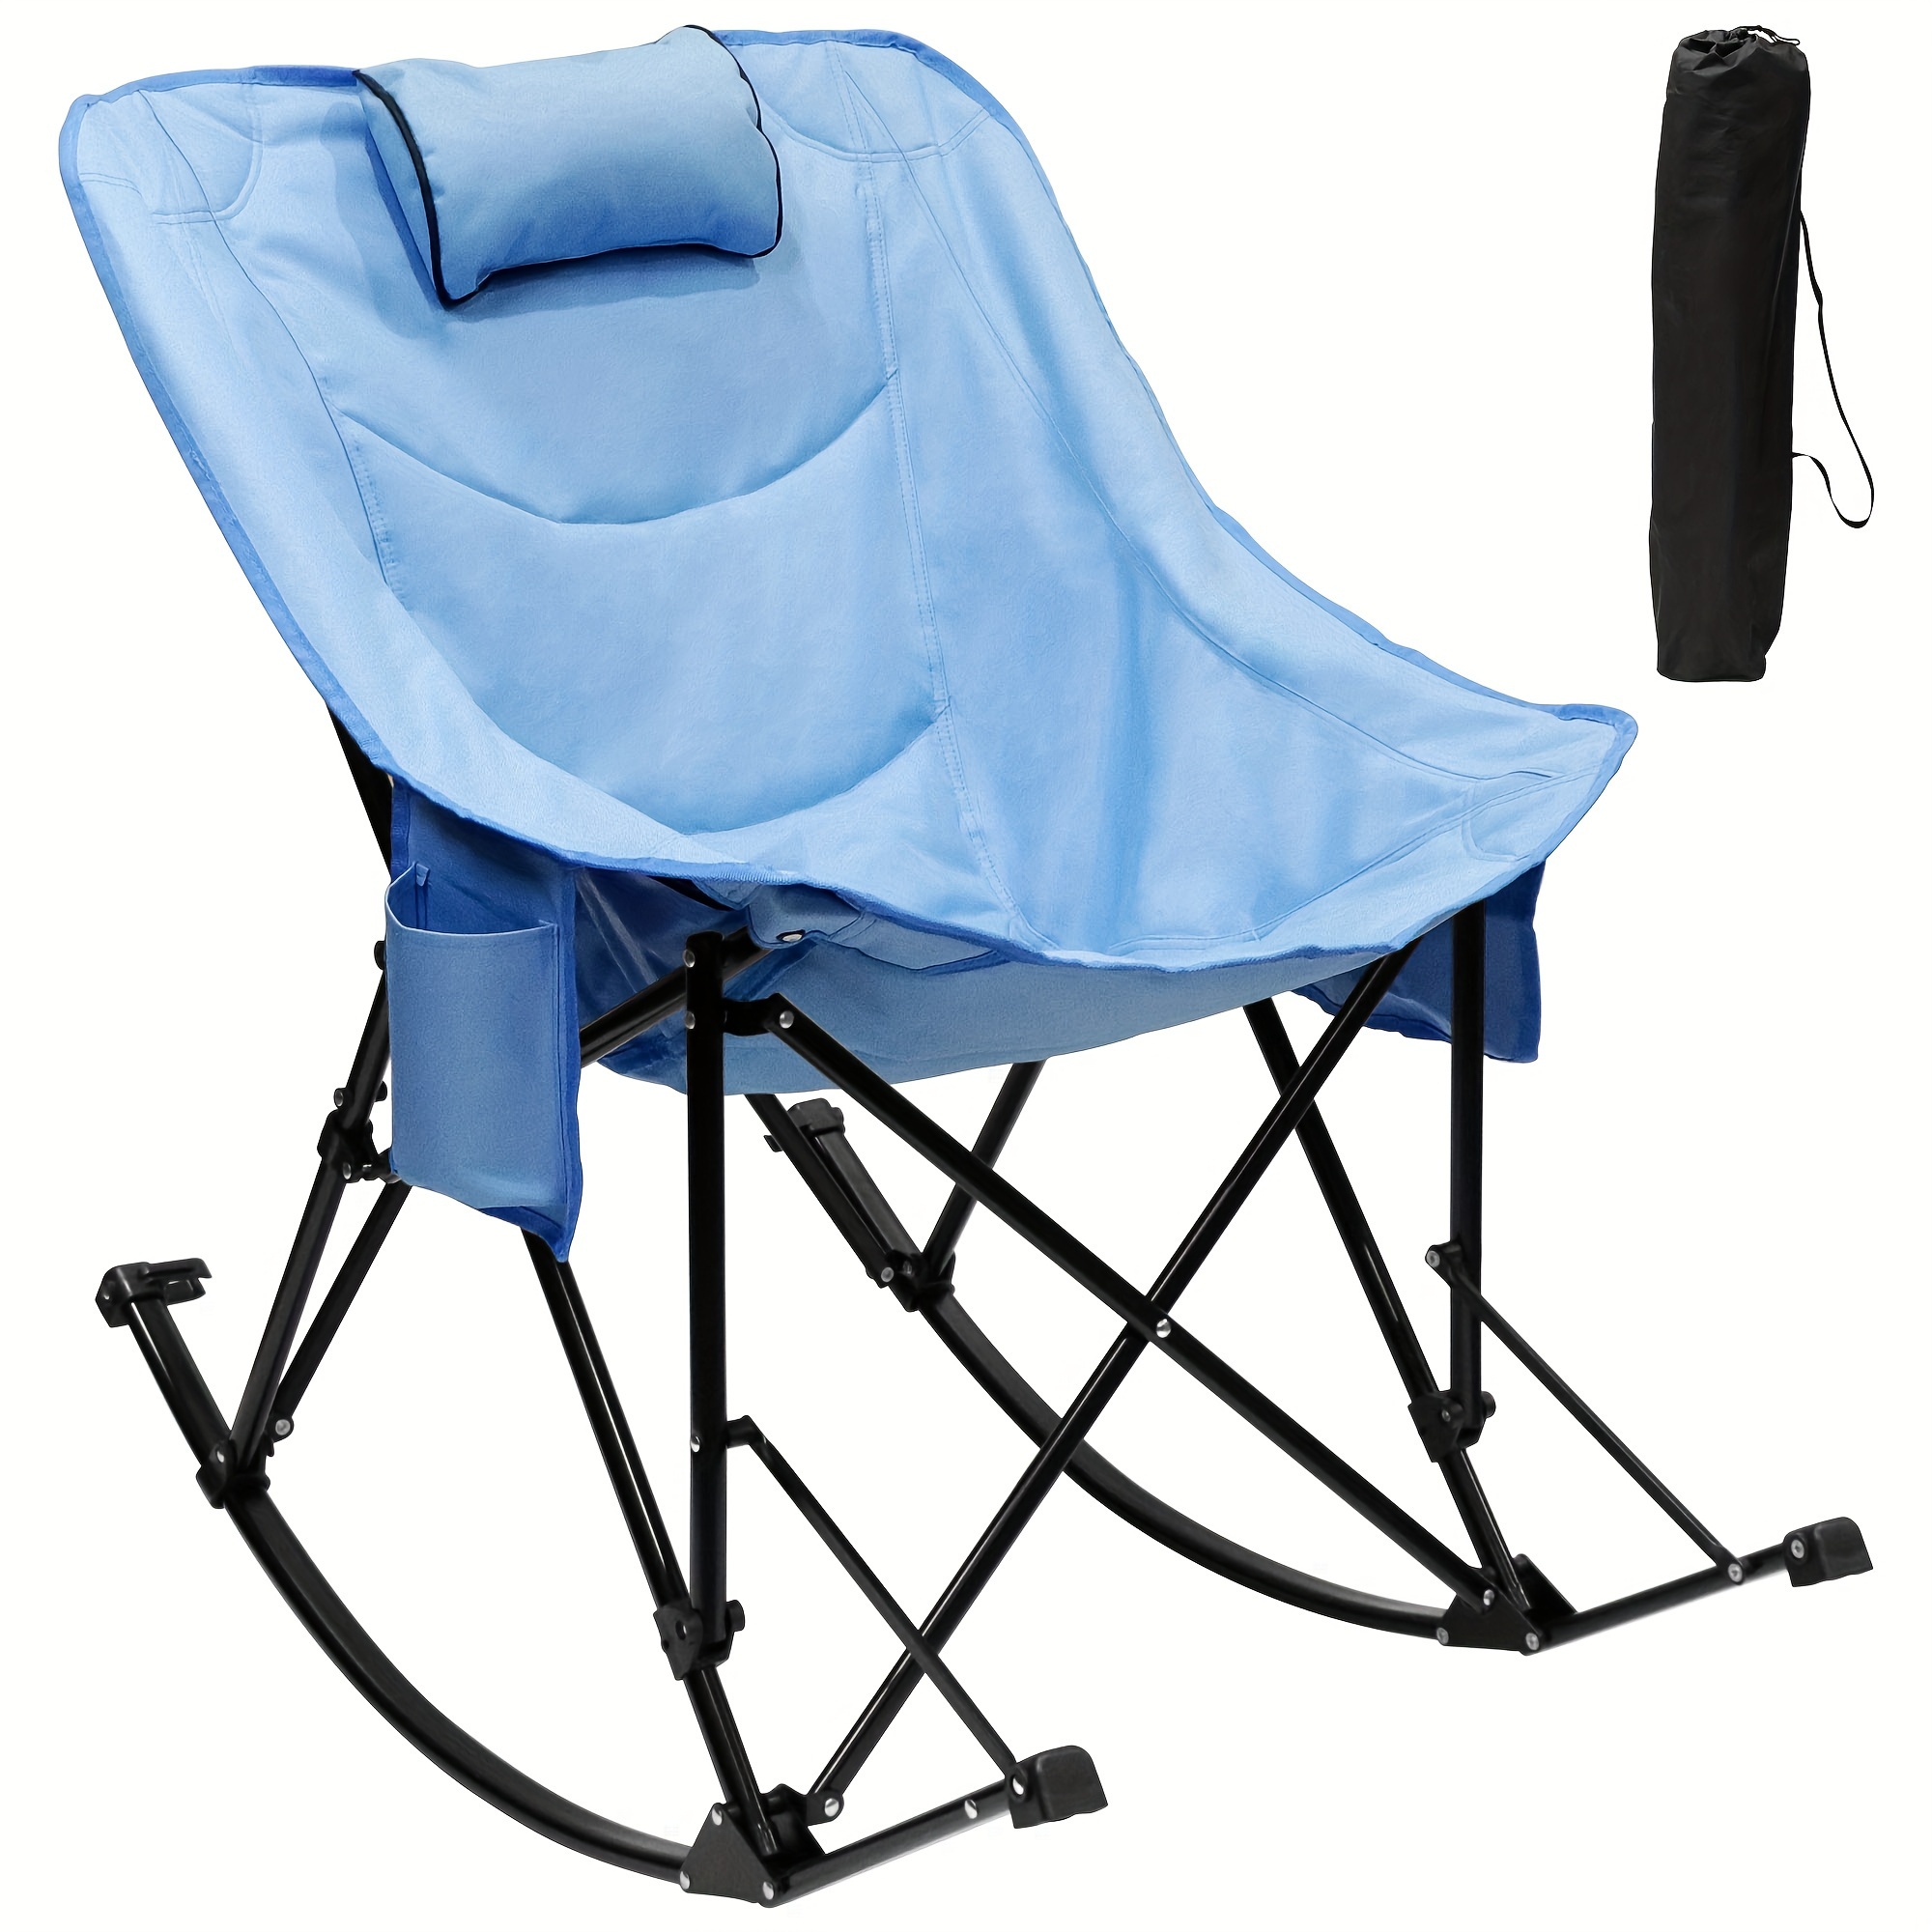 

Oversized Camping Rocking Chair Outdoor, Portable Rocking Chair With Pillow Foldable Camping Chairs For Adults For Outside Lawn Garden Fishing Sporting